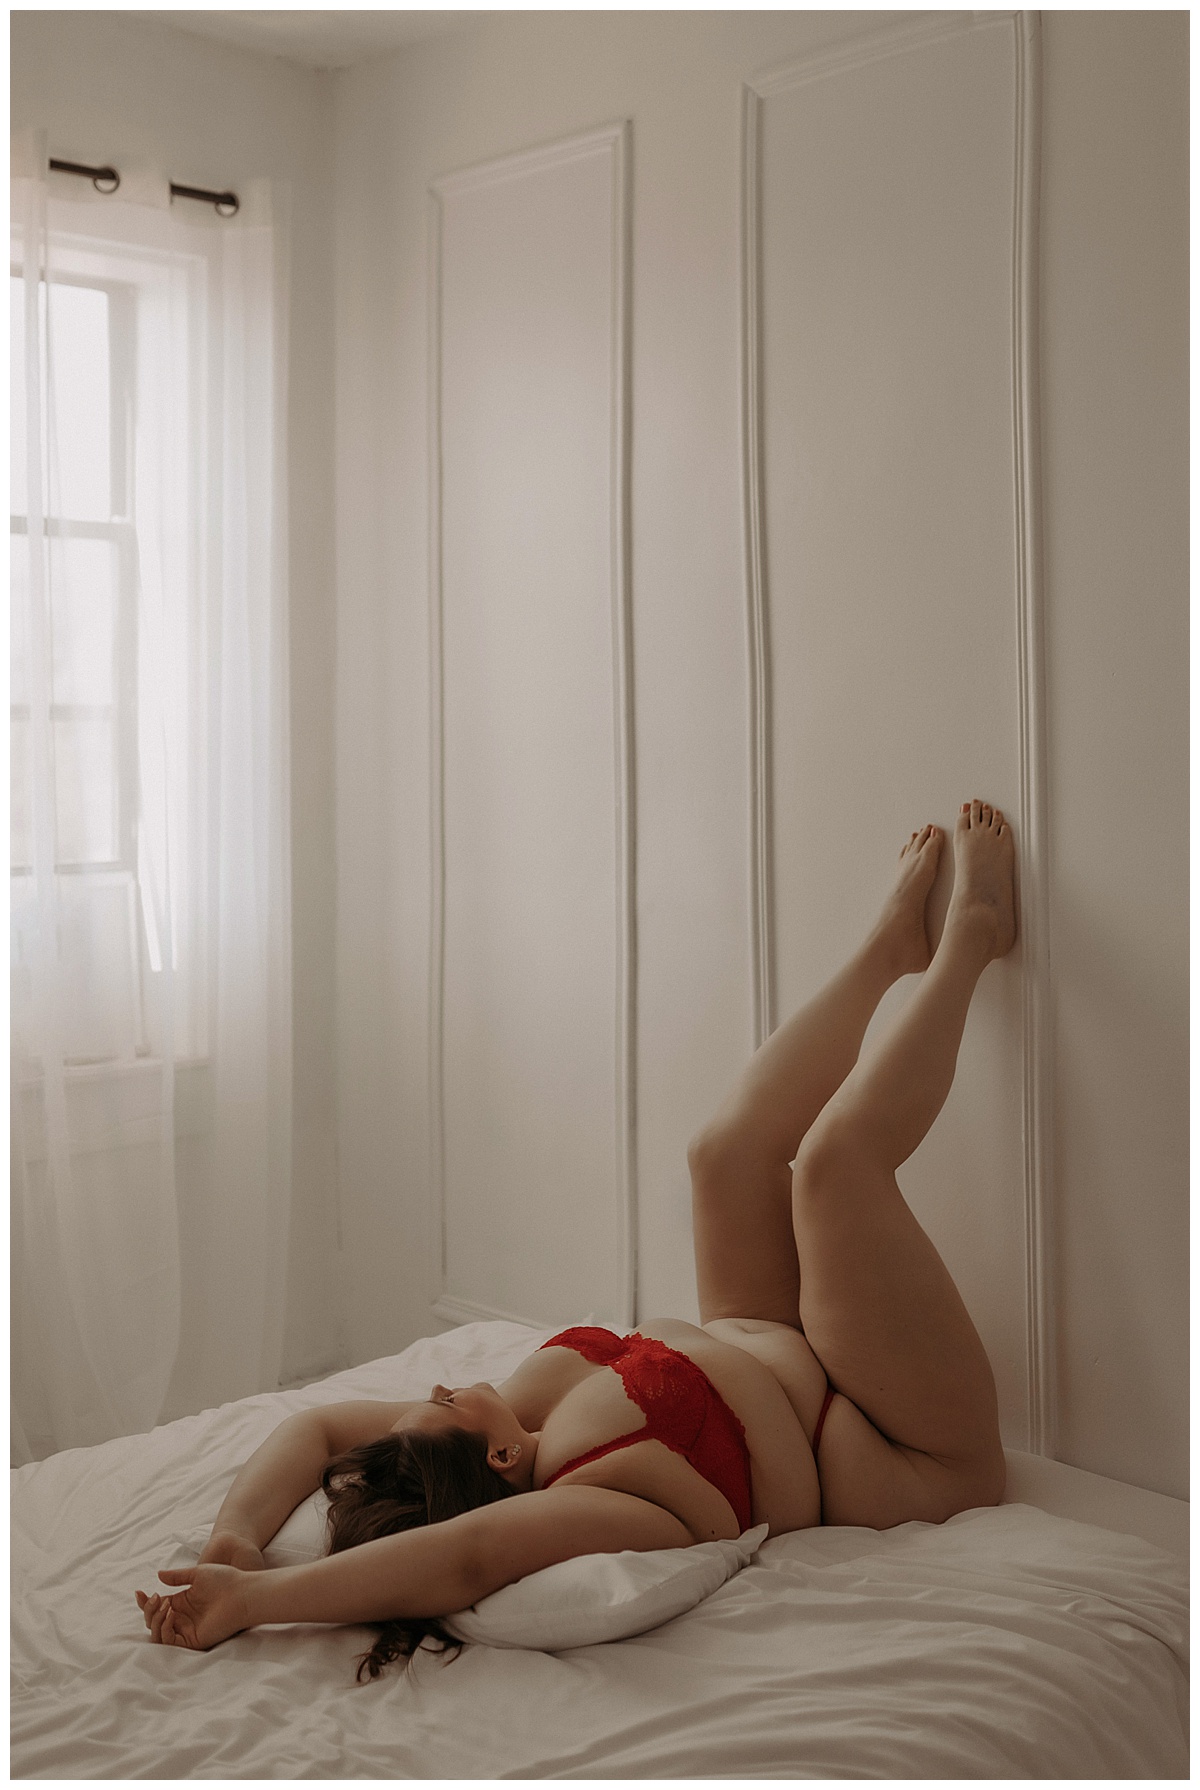 Female lifts her legs against the wall wearing red lingerie for Minneapolis Boudoir Photographer